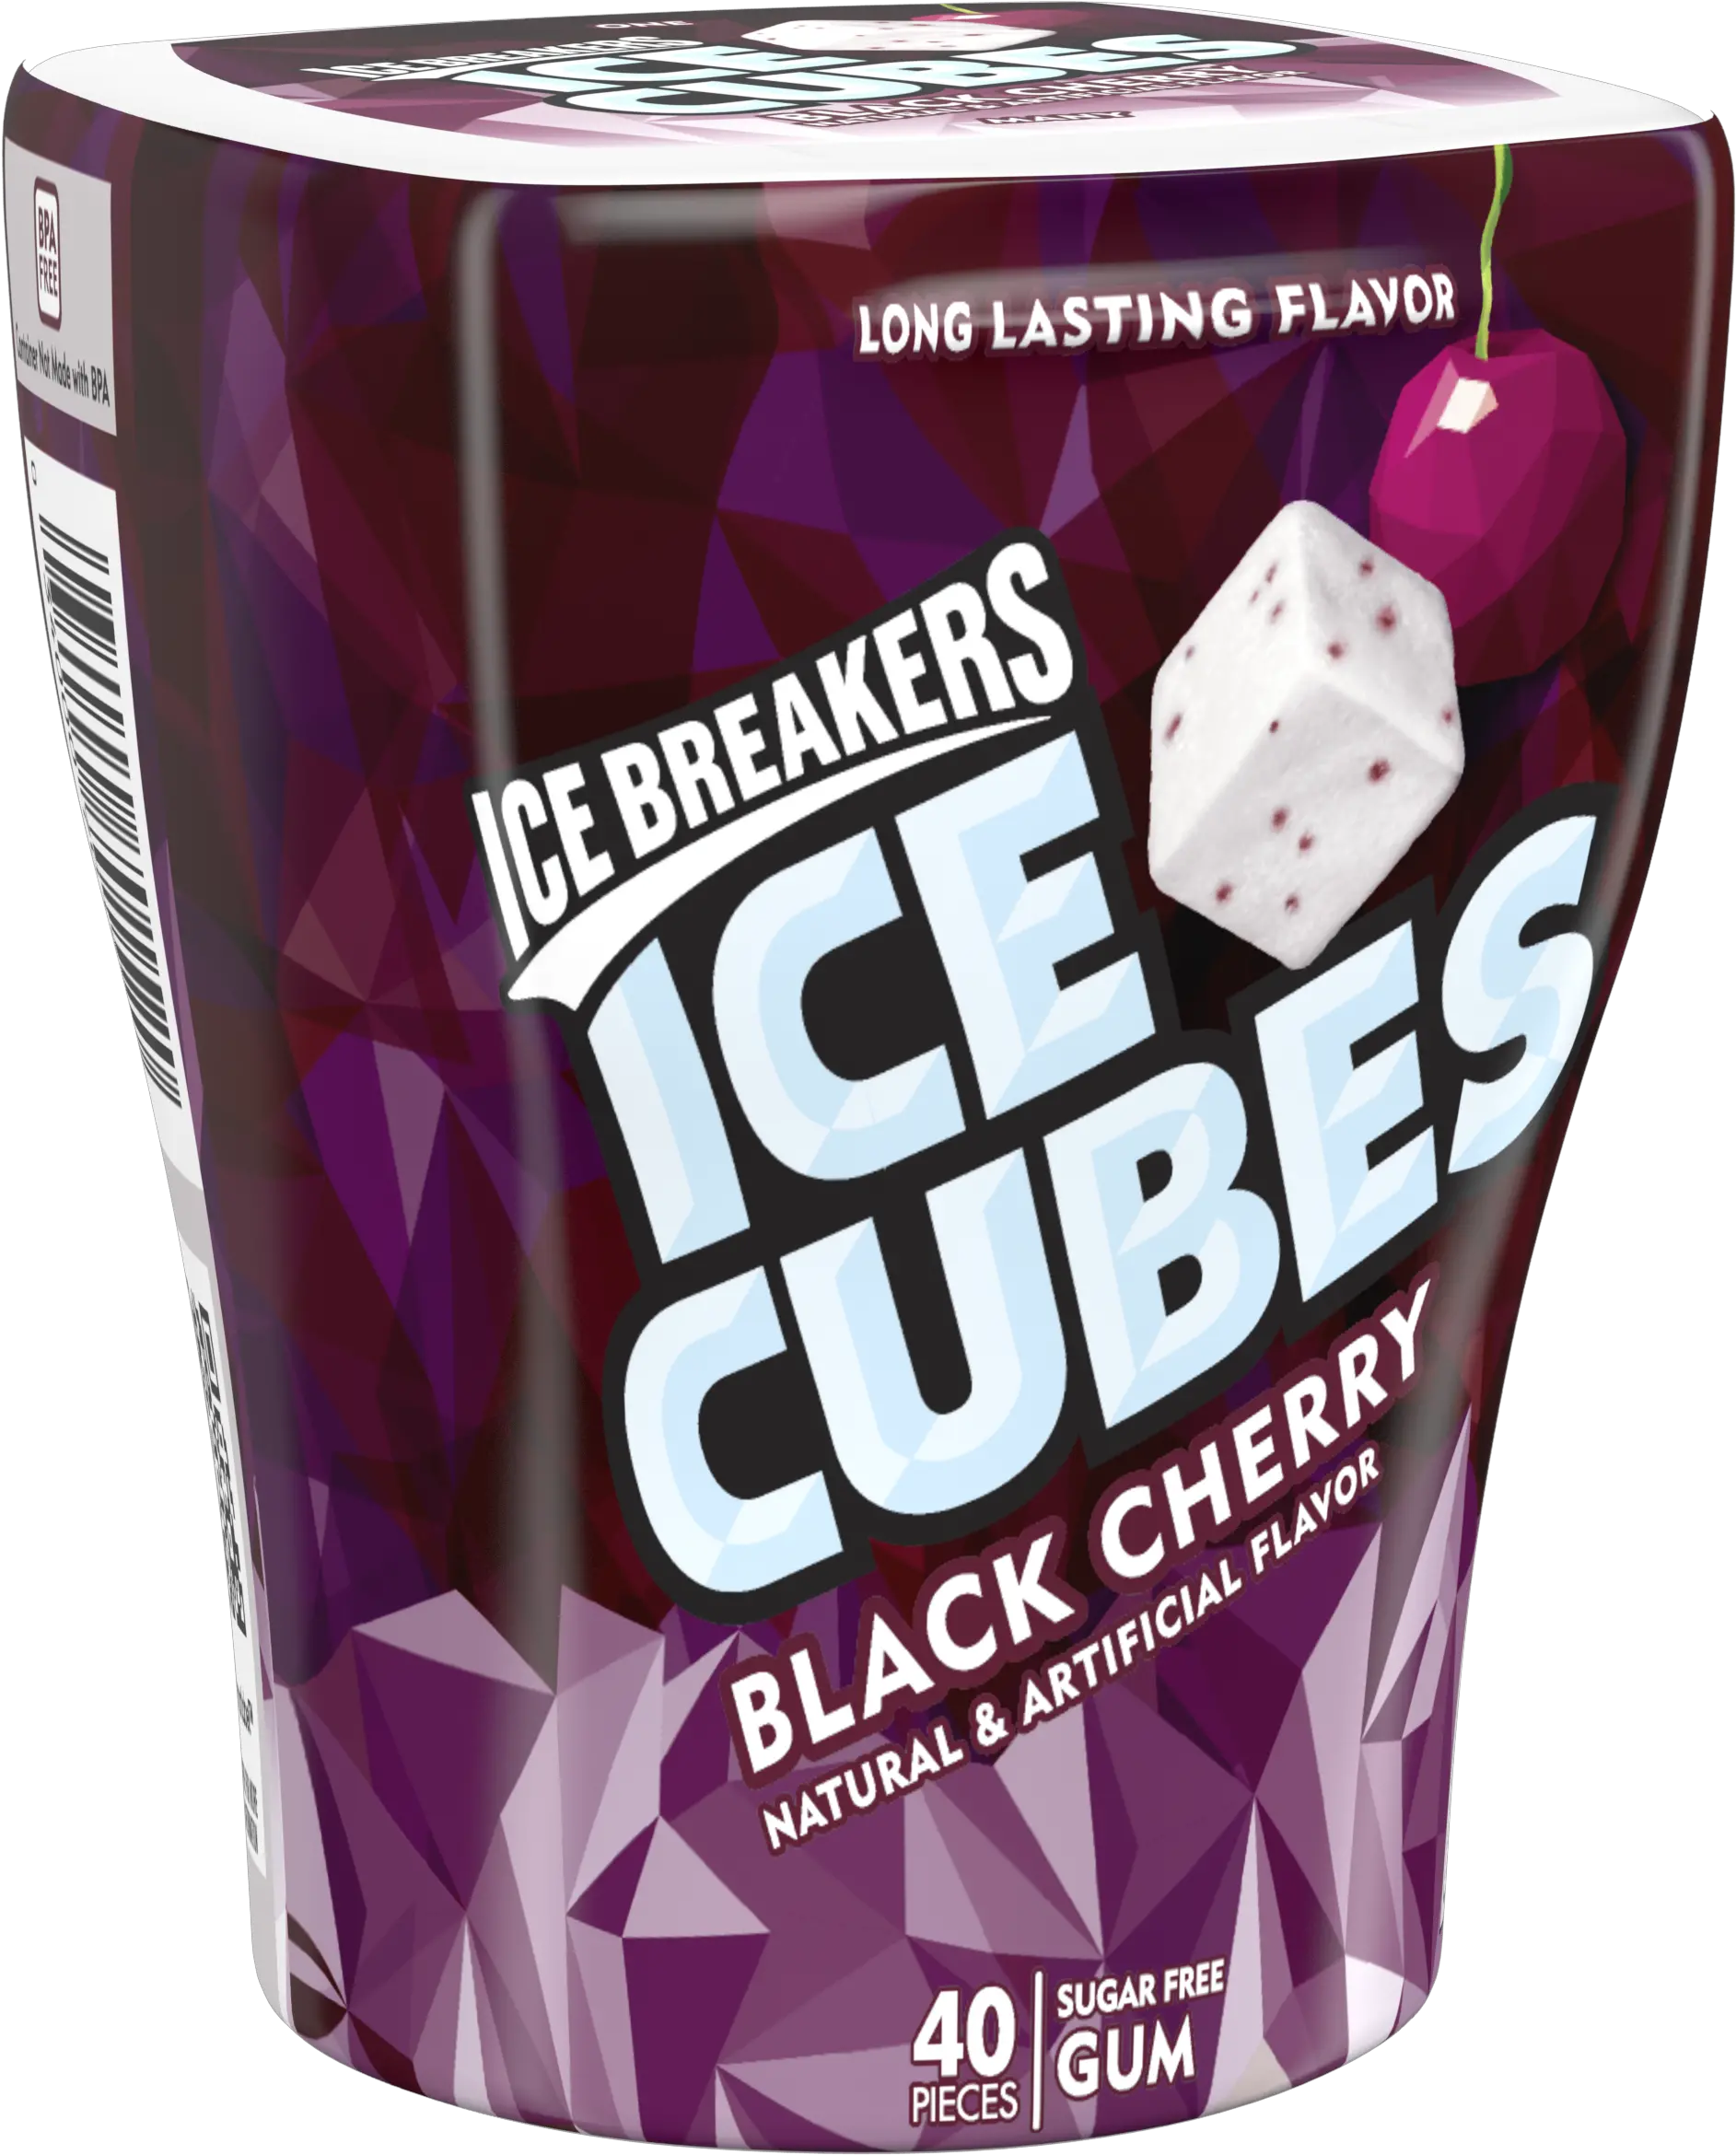 Download Grape Soda Png Full Size Png Image Pngkit Ice Cubes Gum Black Cherry Soda Png